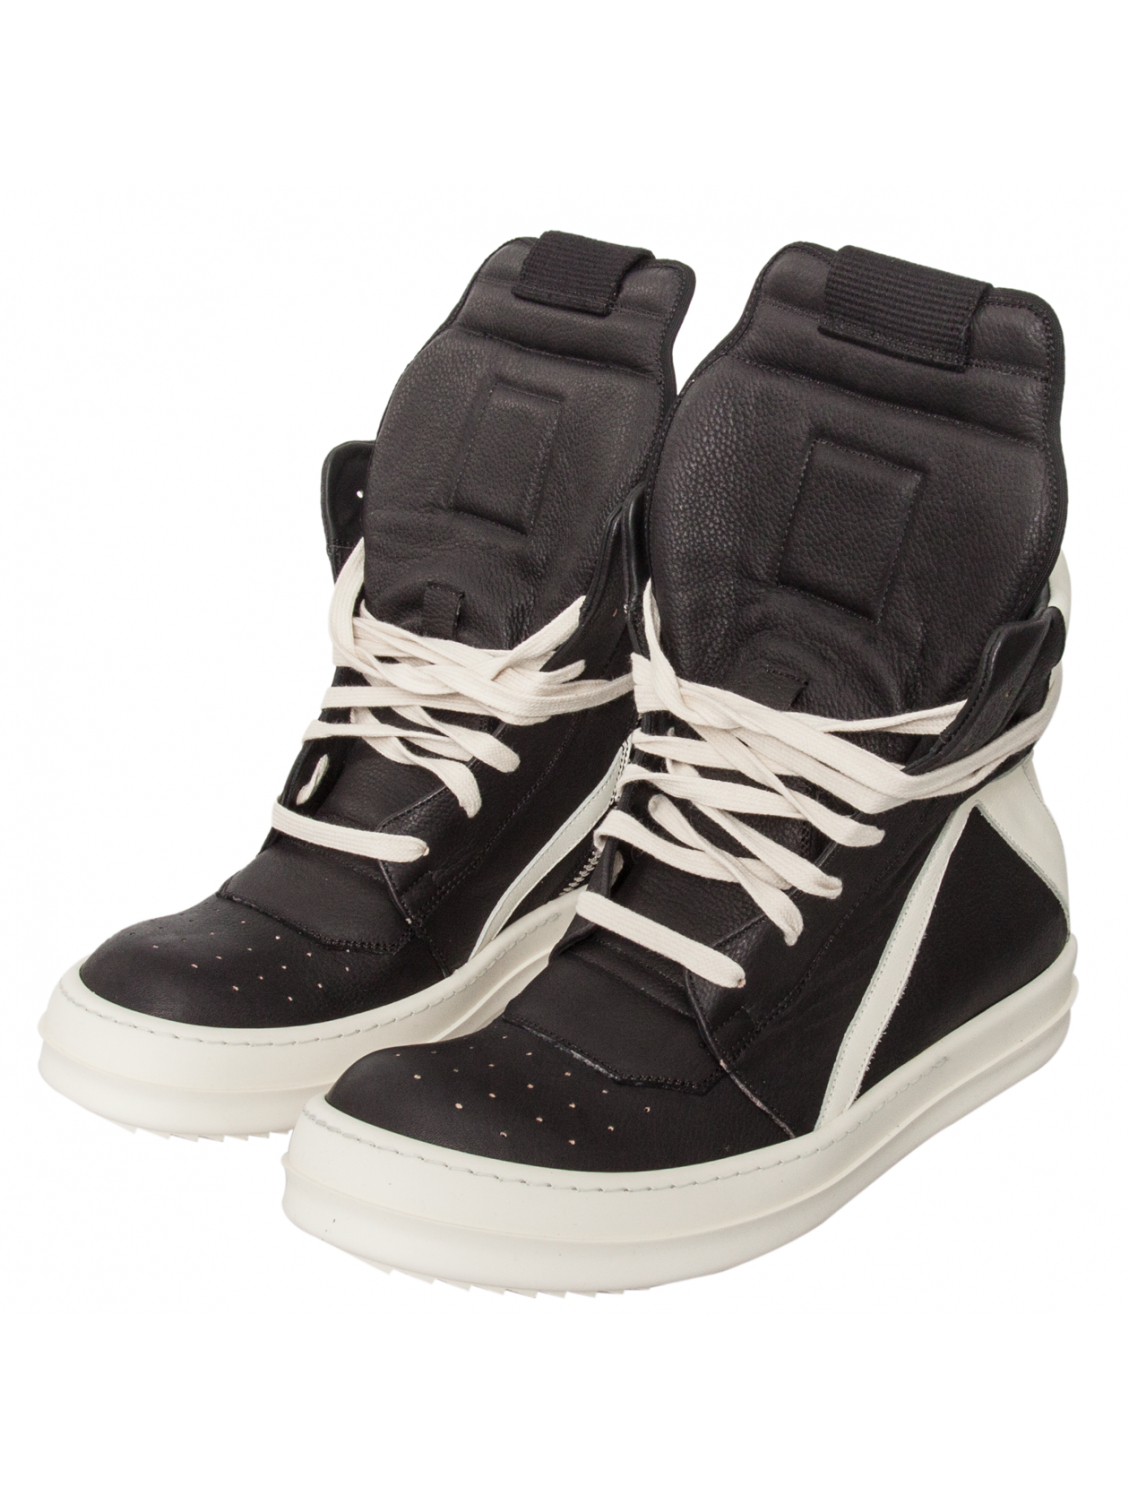 Rick owens Geo Basket Textured Leather Boots Black/white in White | Lyst